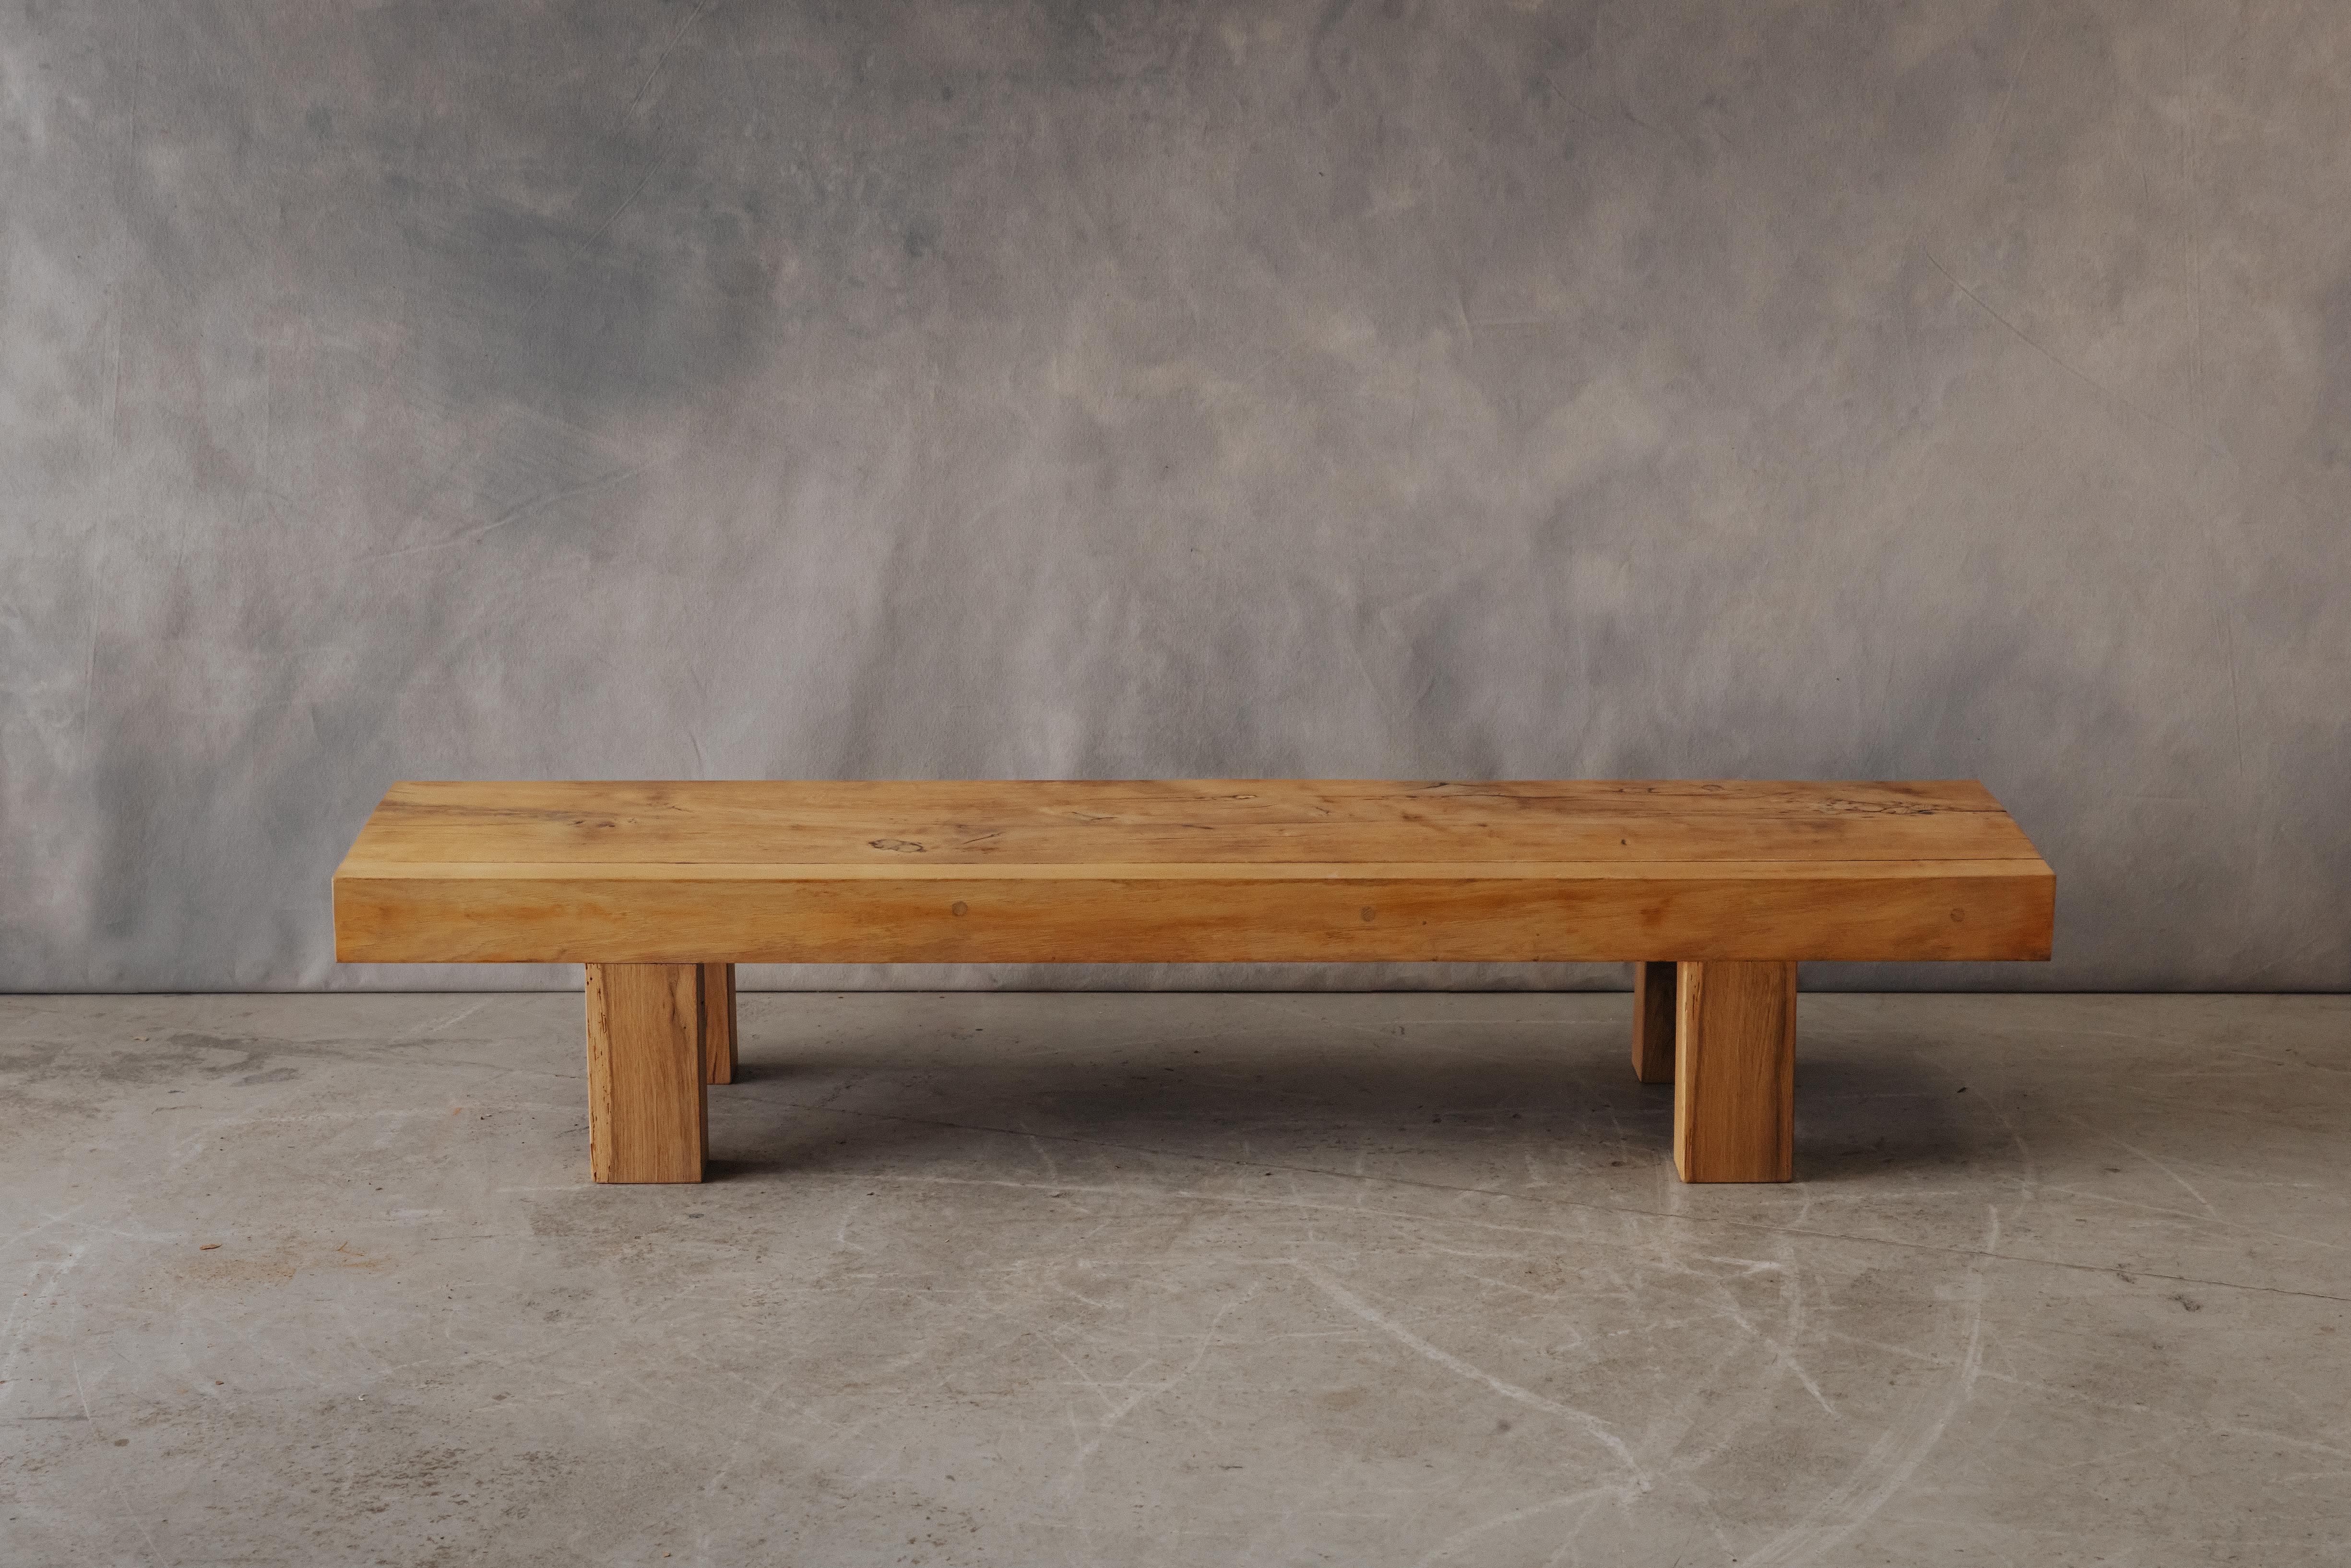 Vintage Primitive Coffee Table From France, Circa 1950,  Solid oak construction with very light wear and use.